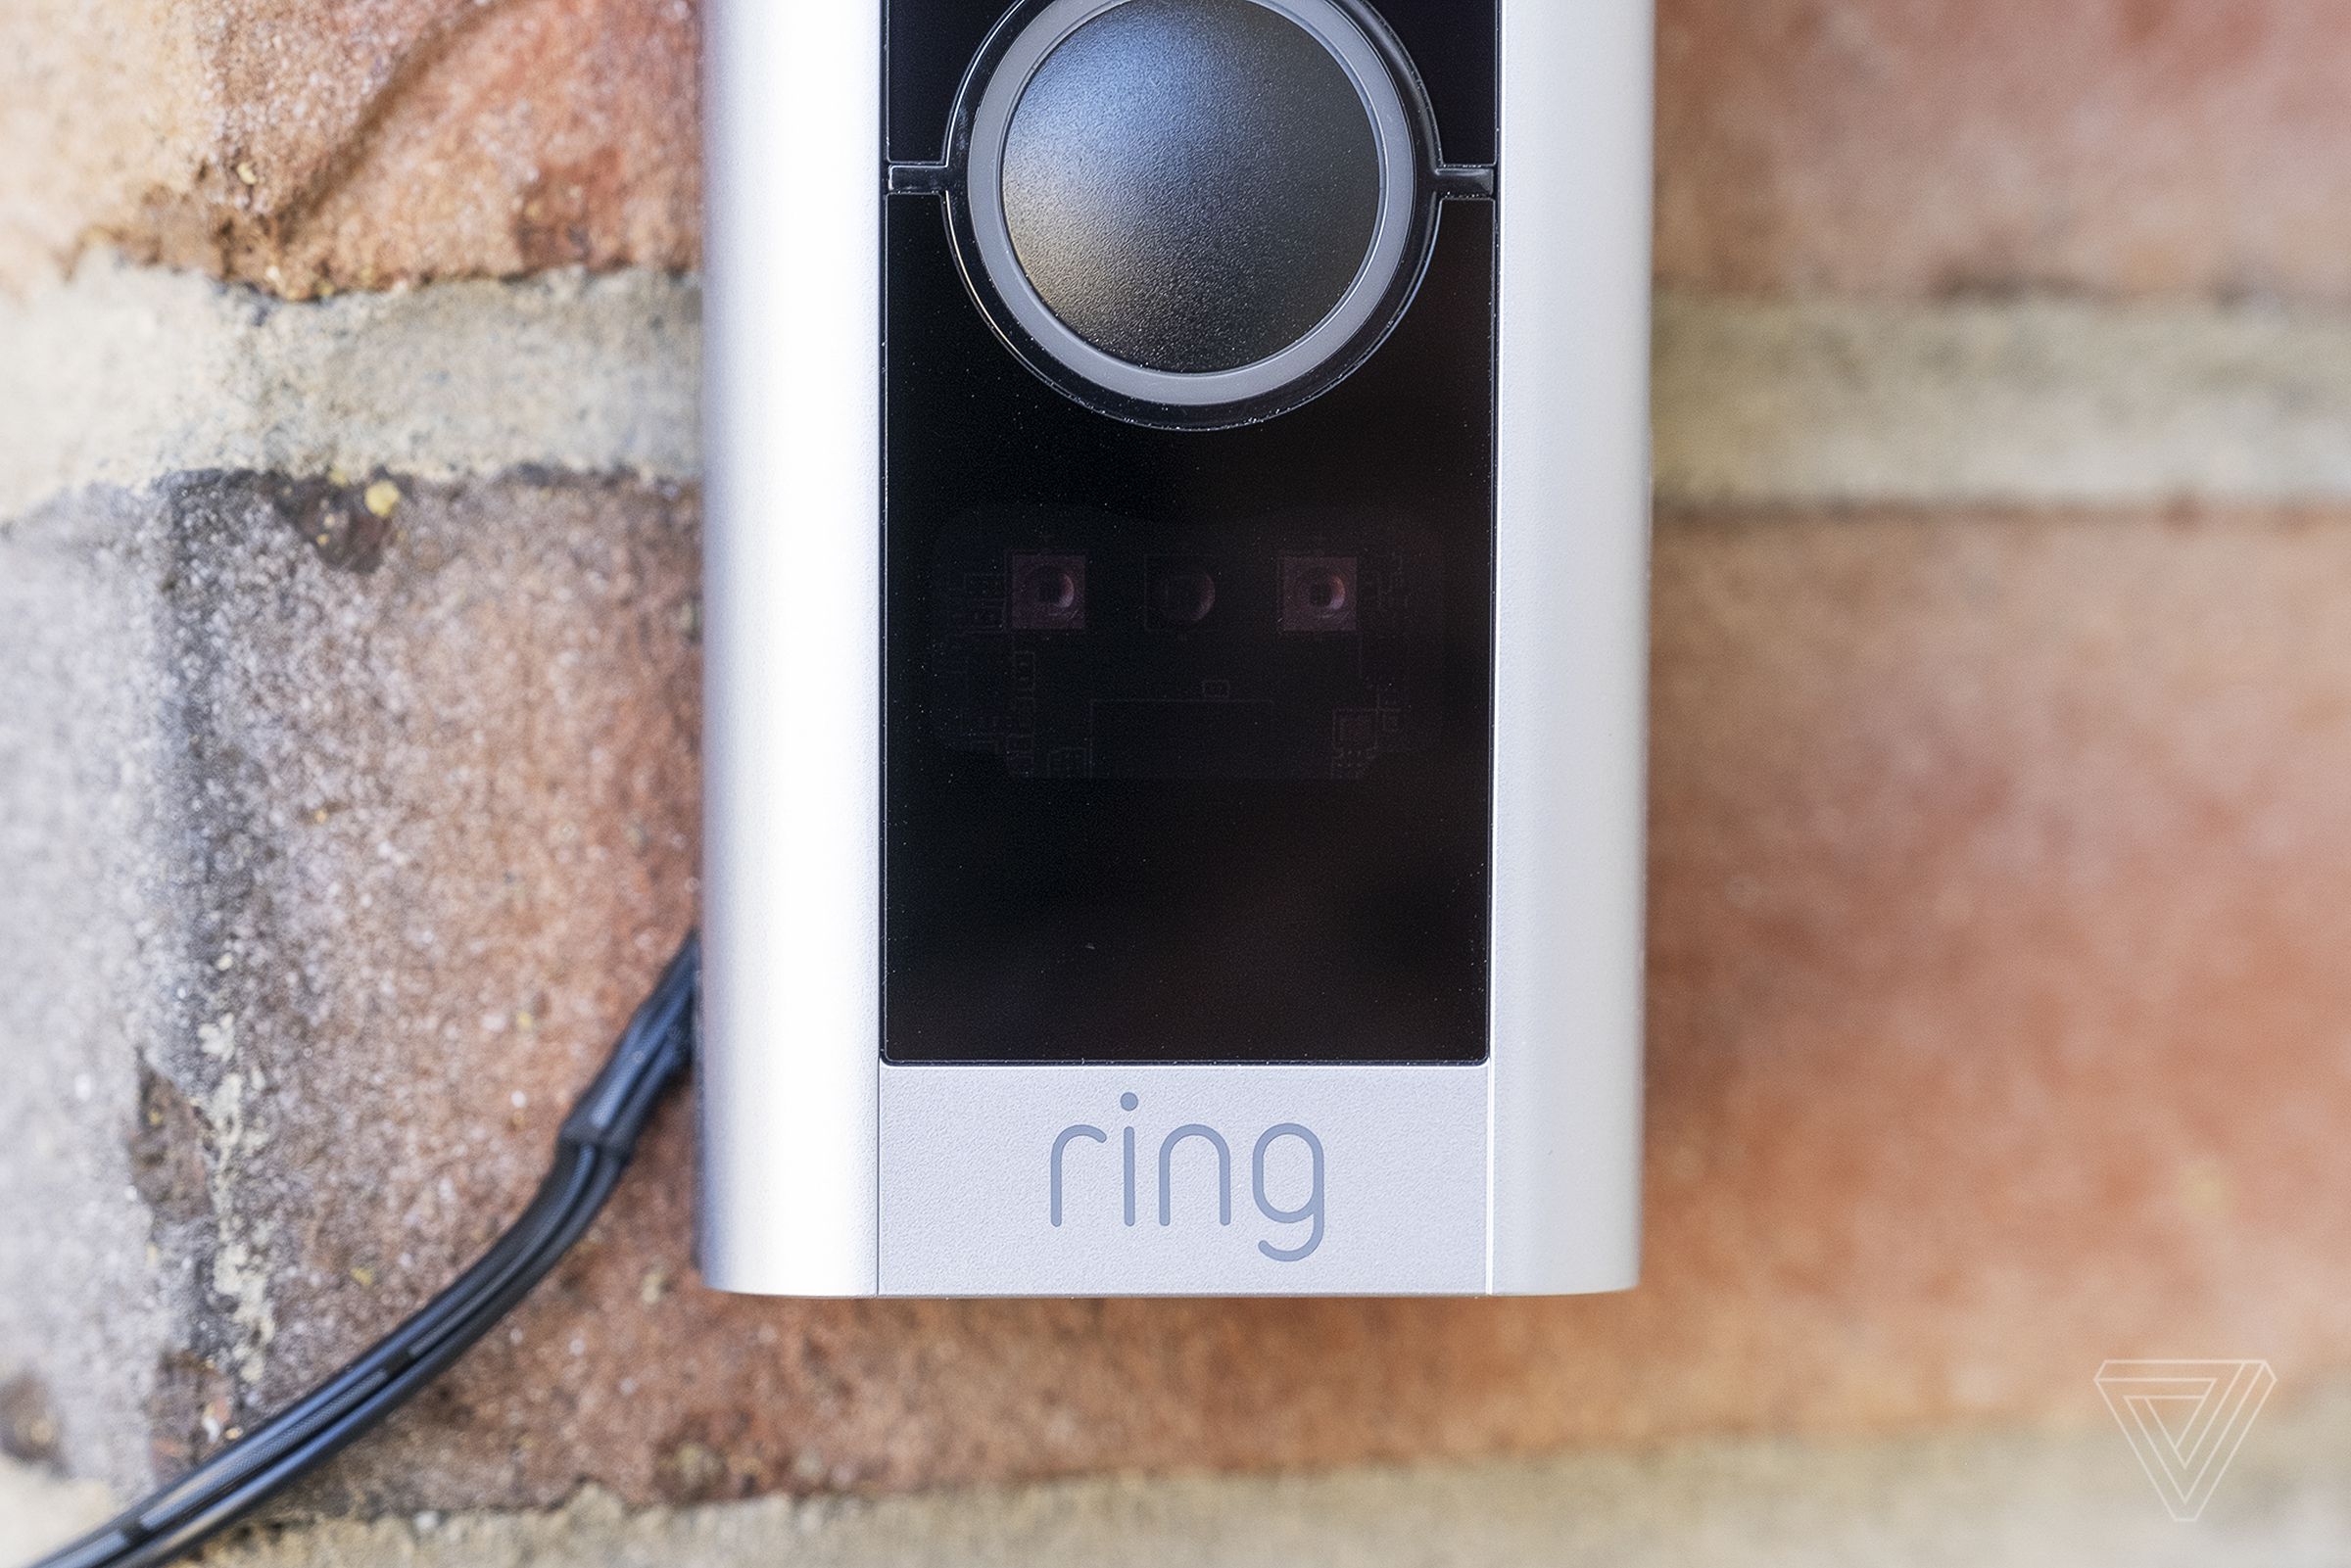 Despite its higher-than-average price tag, the Video Doorbell Pro 2 is still very plasticky and looks cheap compared to other options.